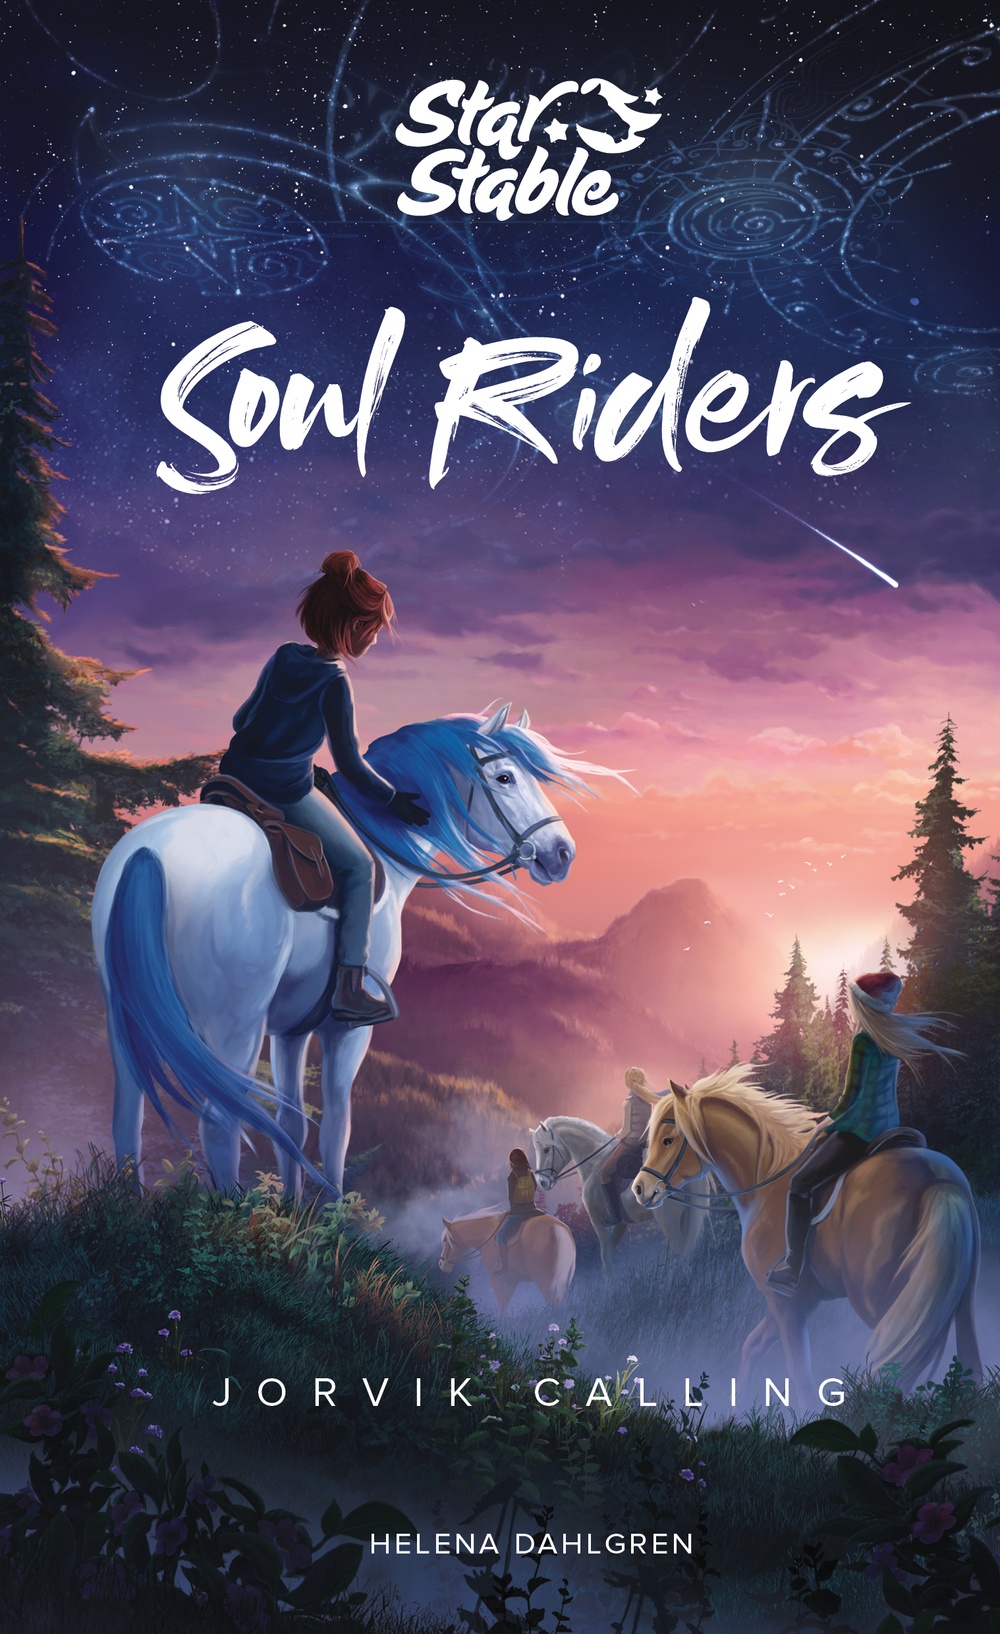 Bookcover Soul Riders 1 ENG.jpg